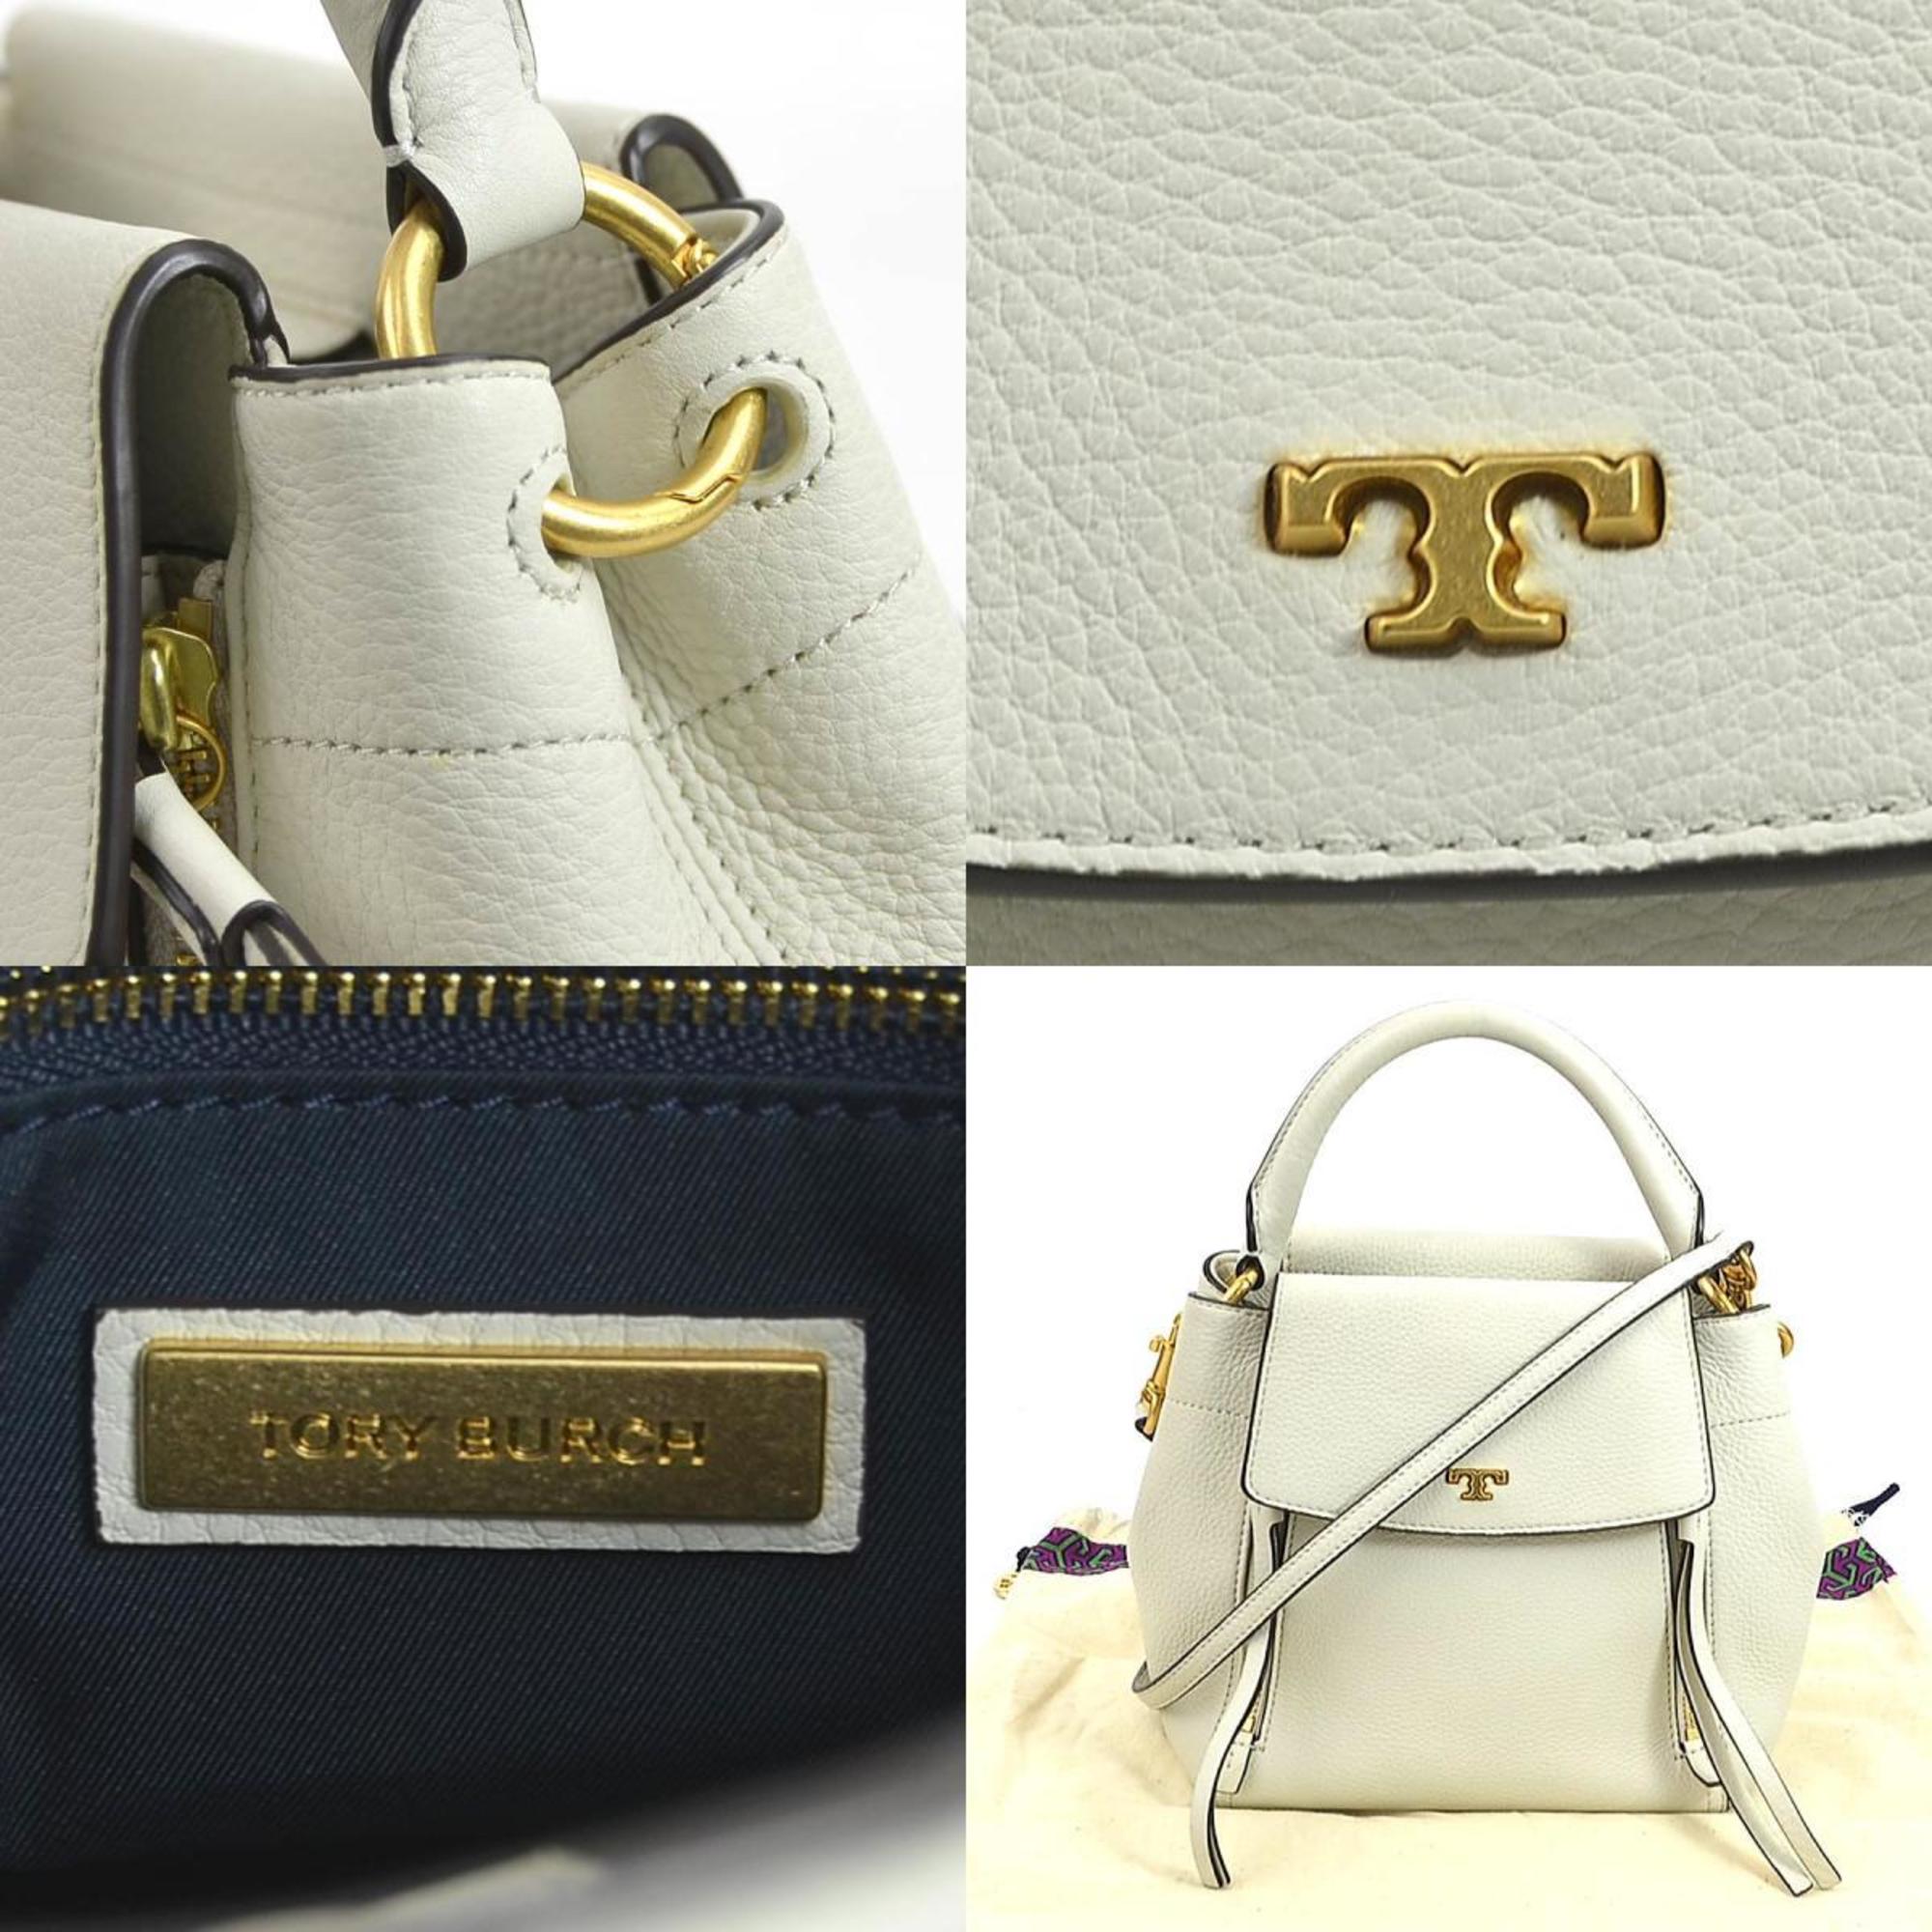 Tory Burch shoulder bag leather ivory women's h30308f